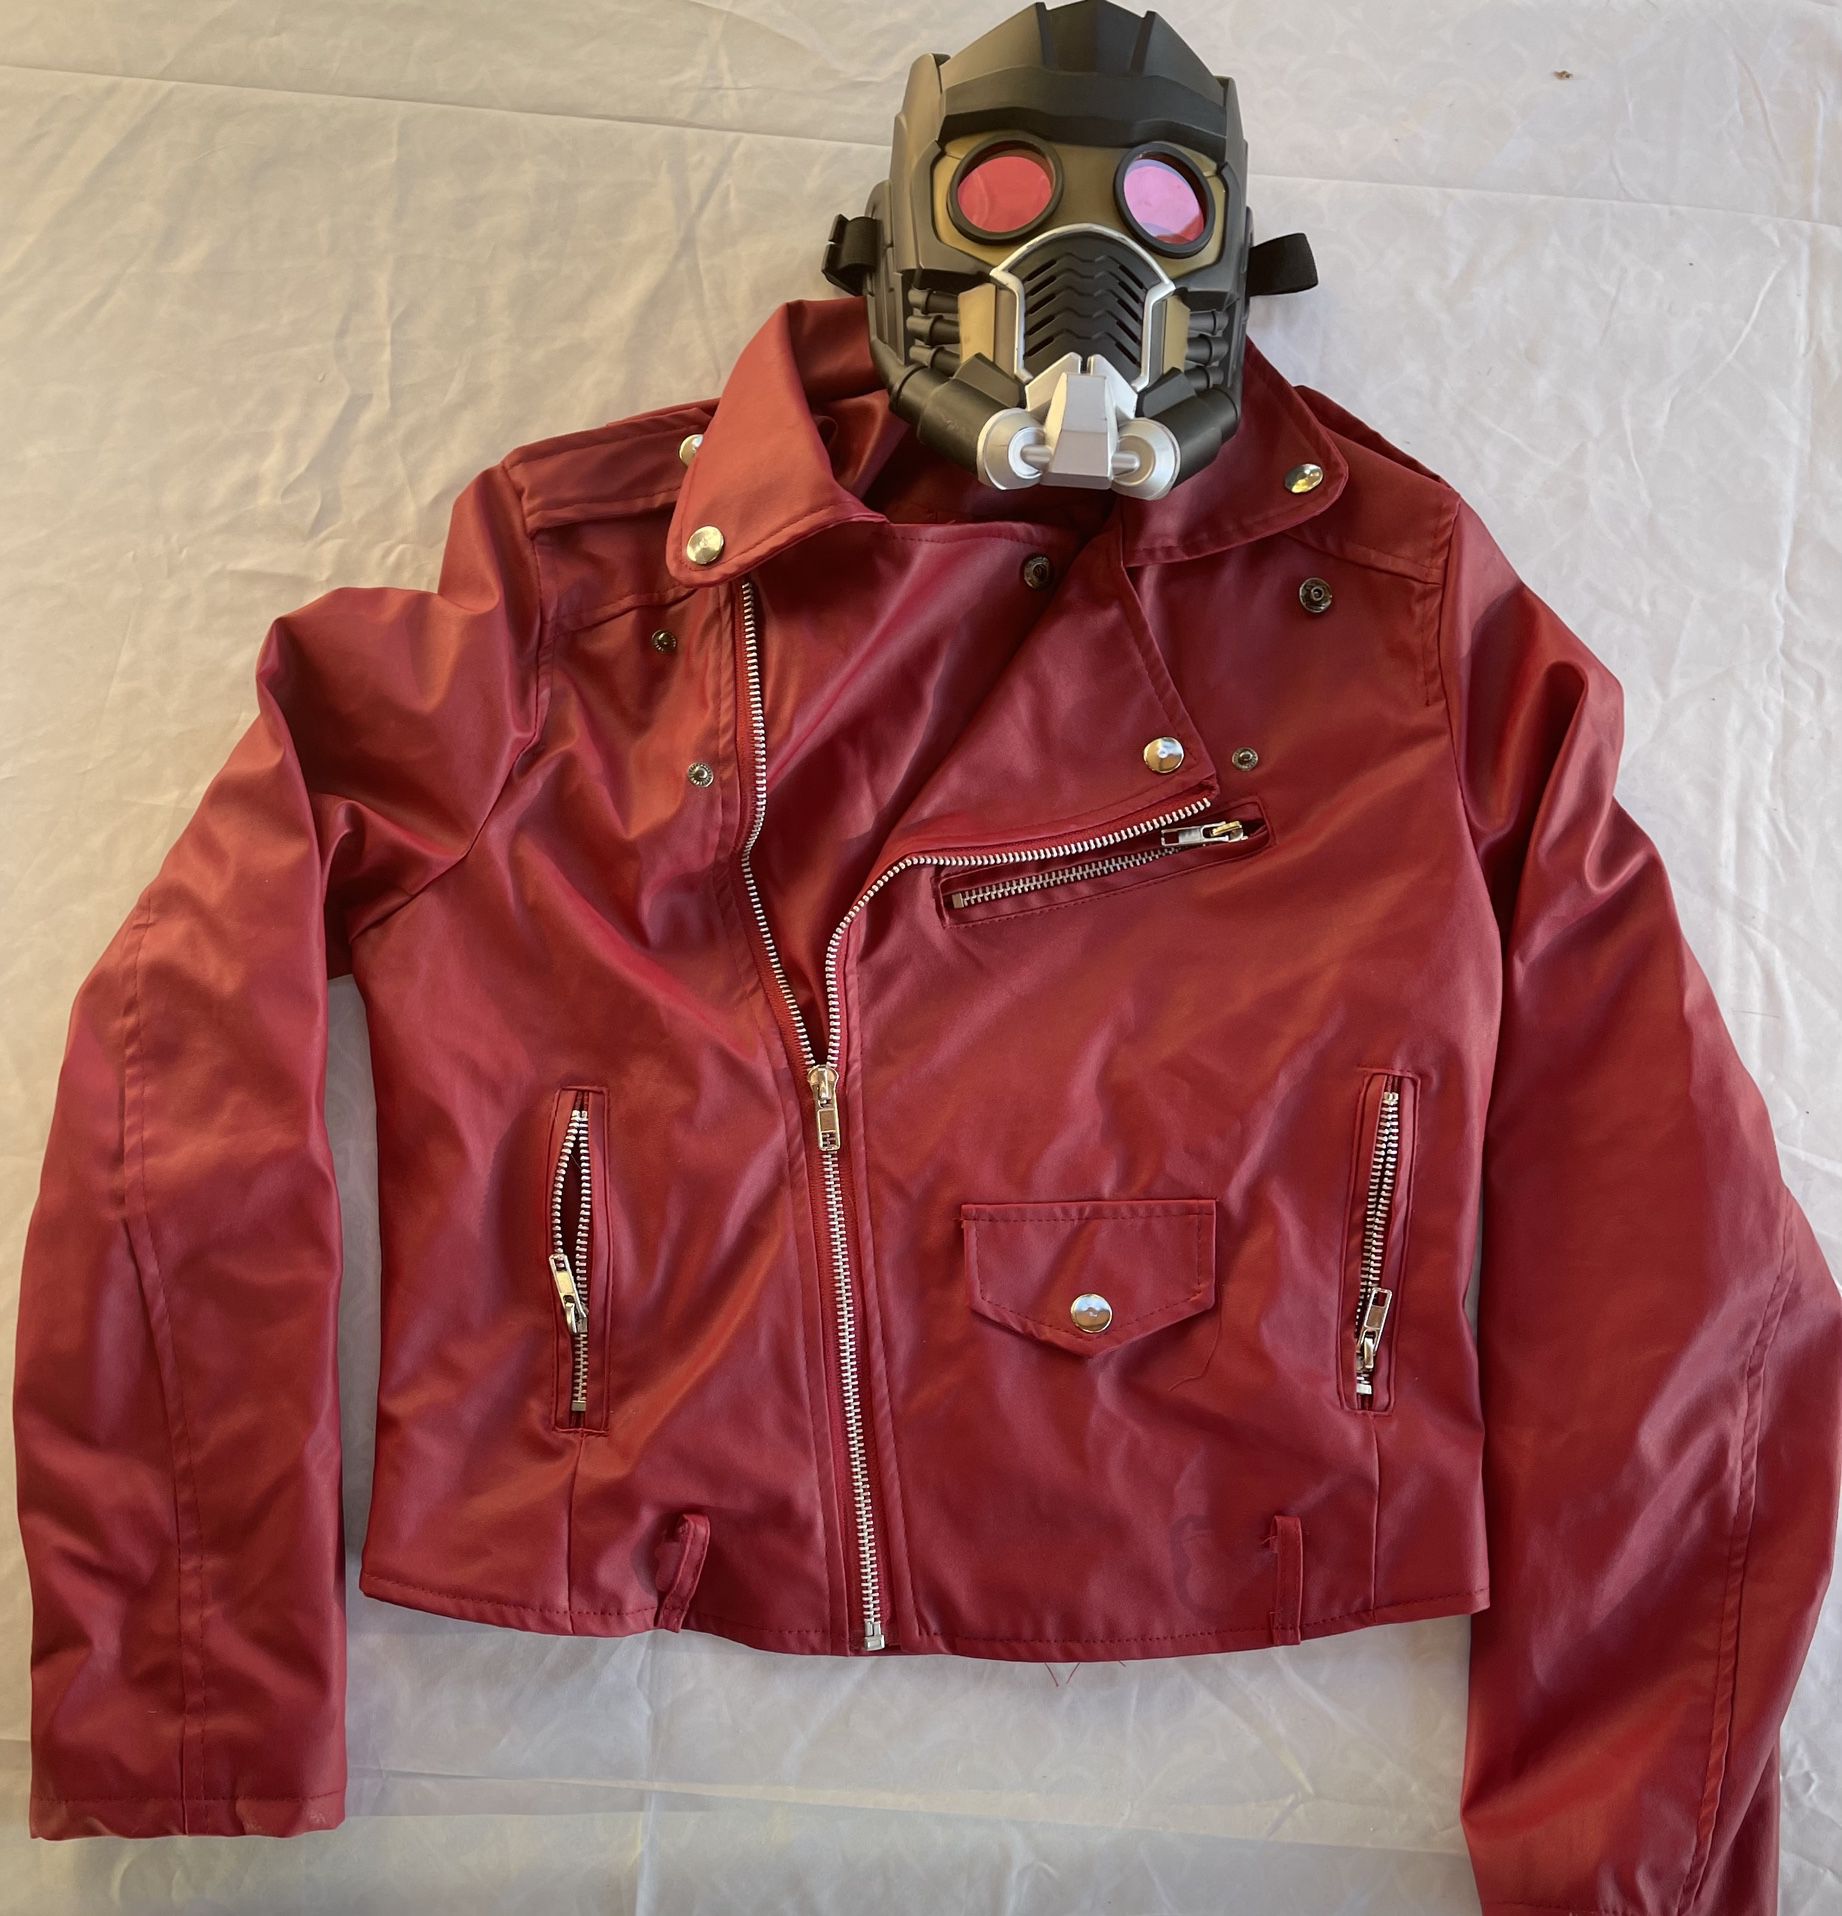 Guardians of The Galaxy Star Lord Costume 